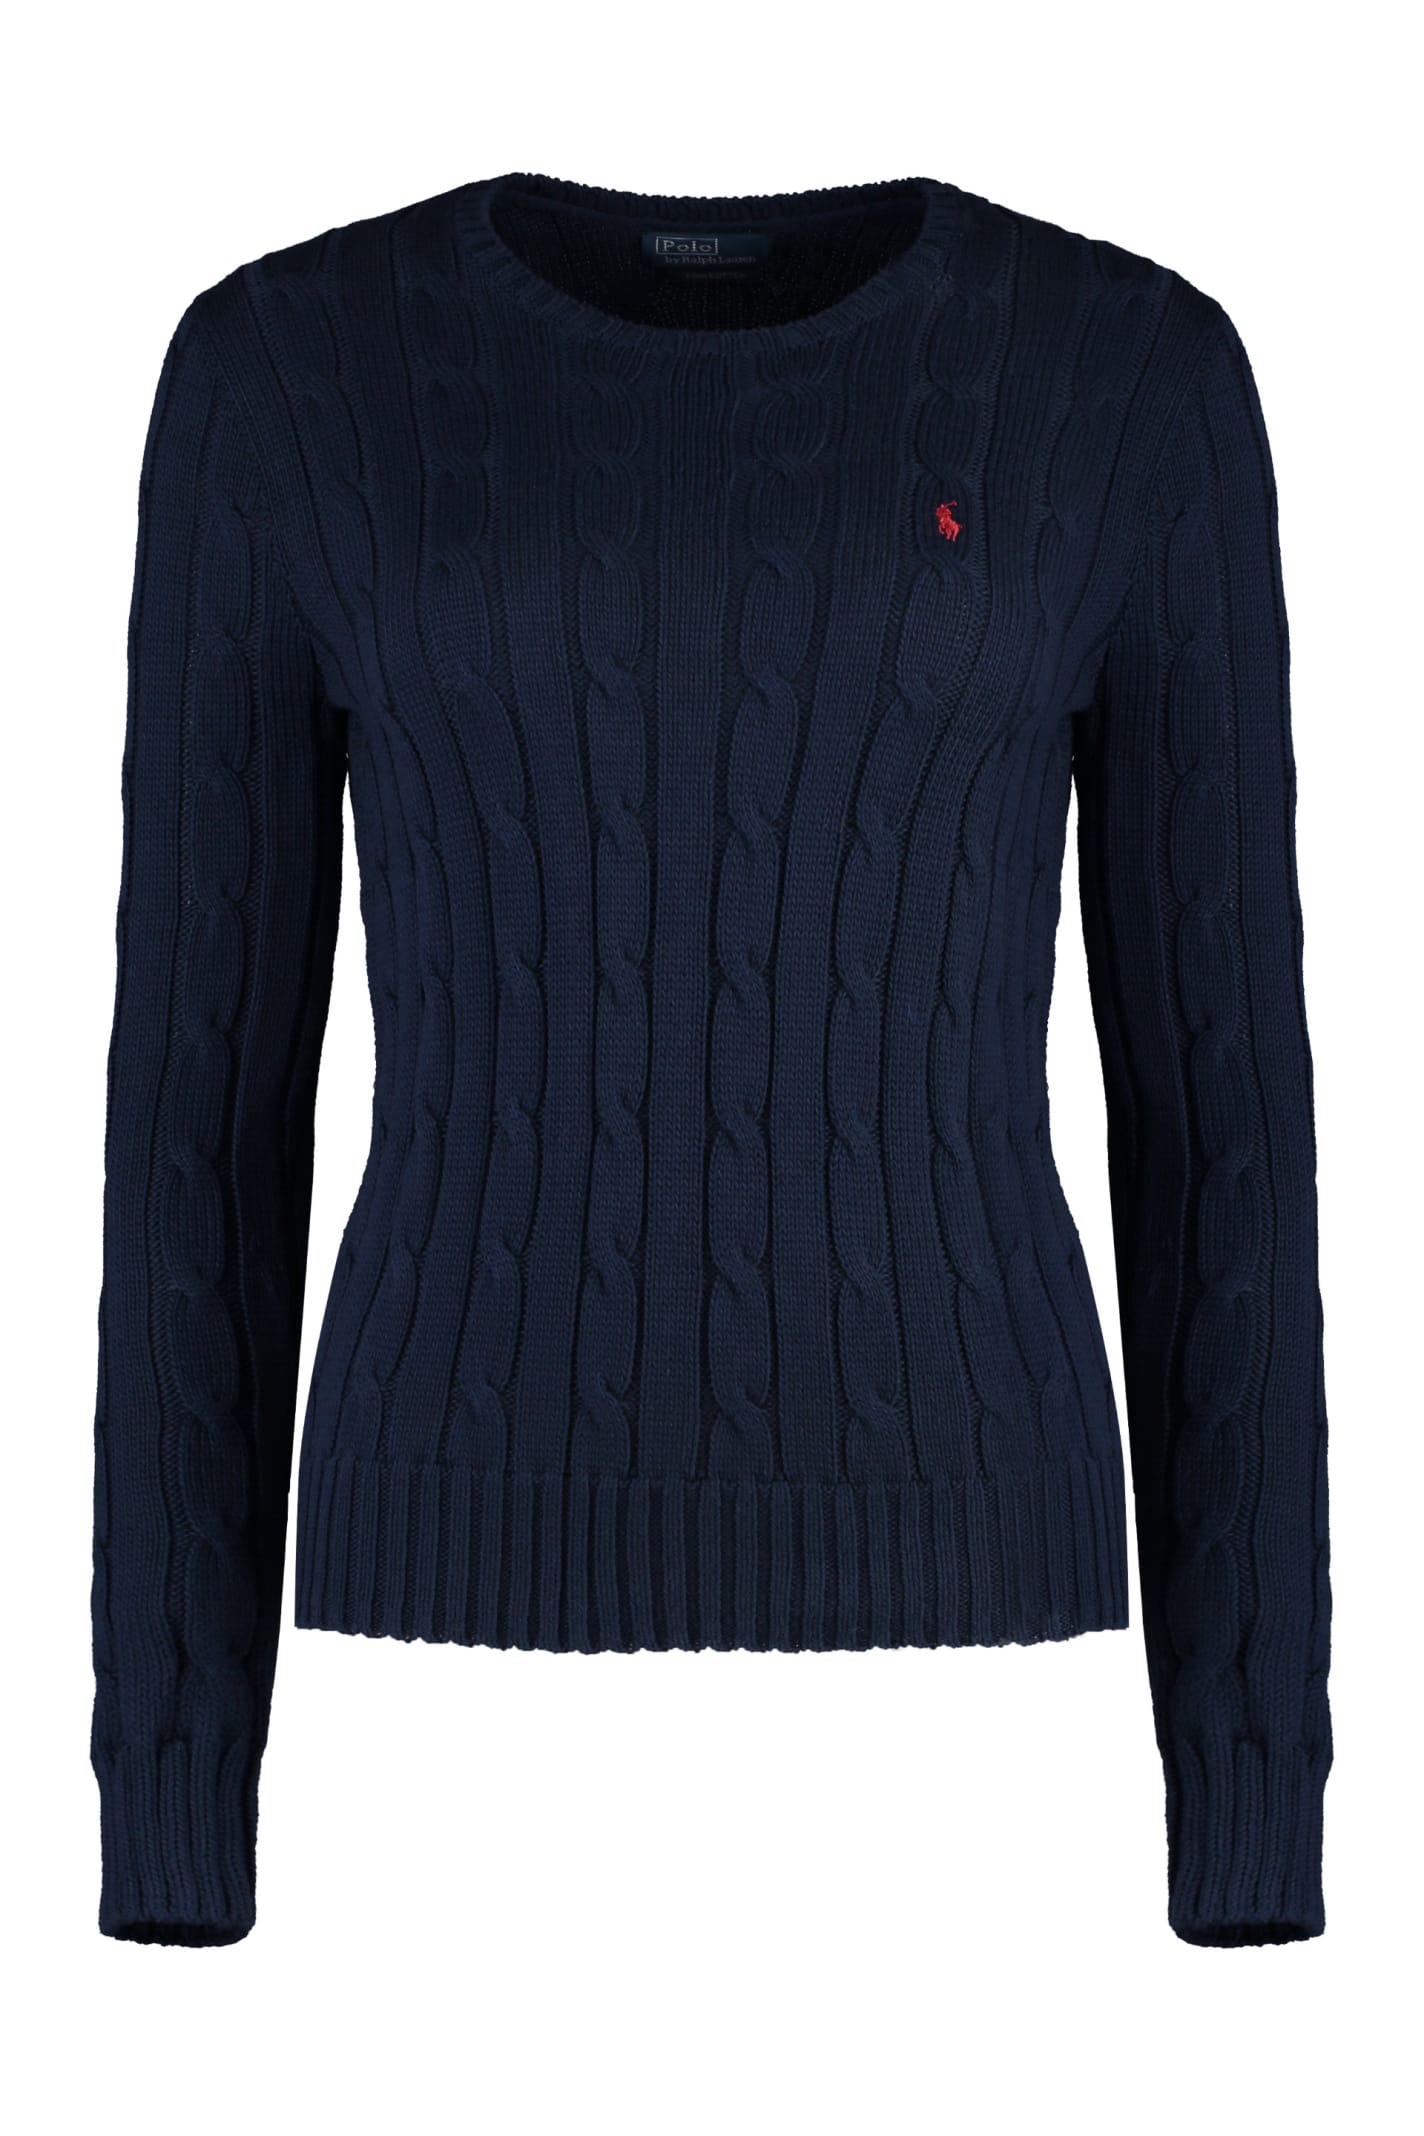 Ralph Lauren Cable Knit Sweater In Black